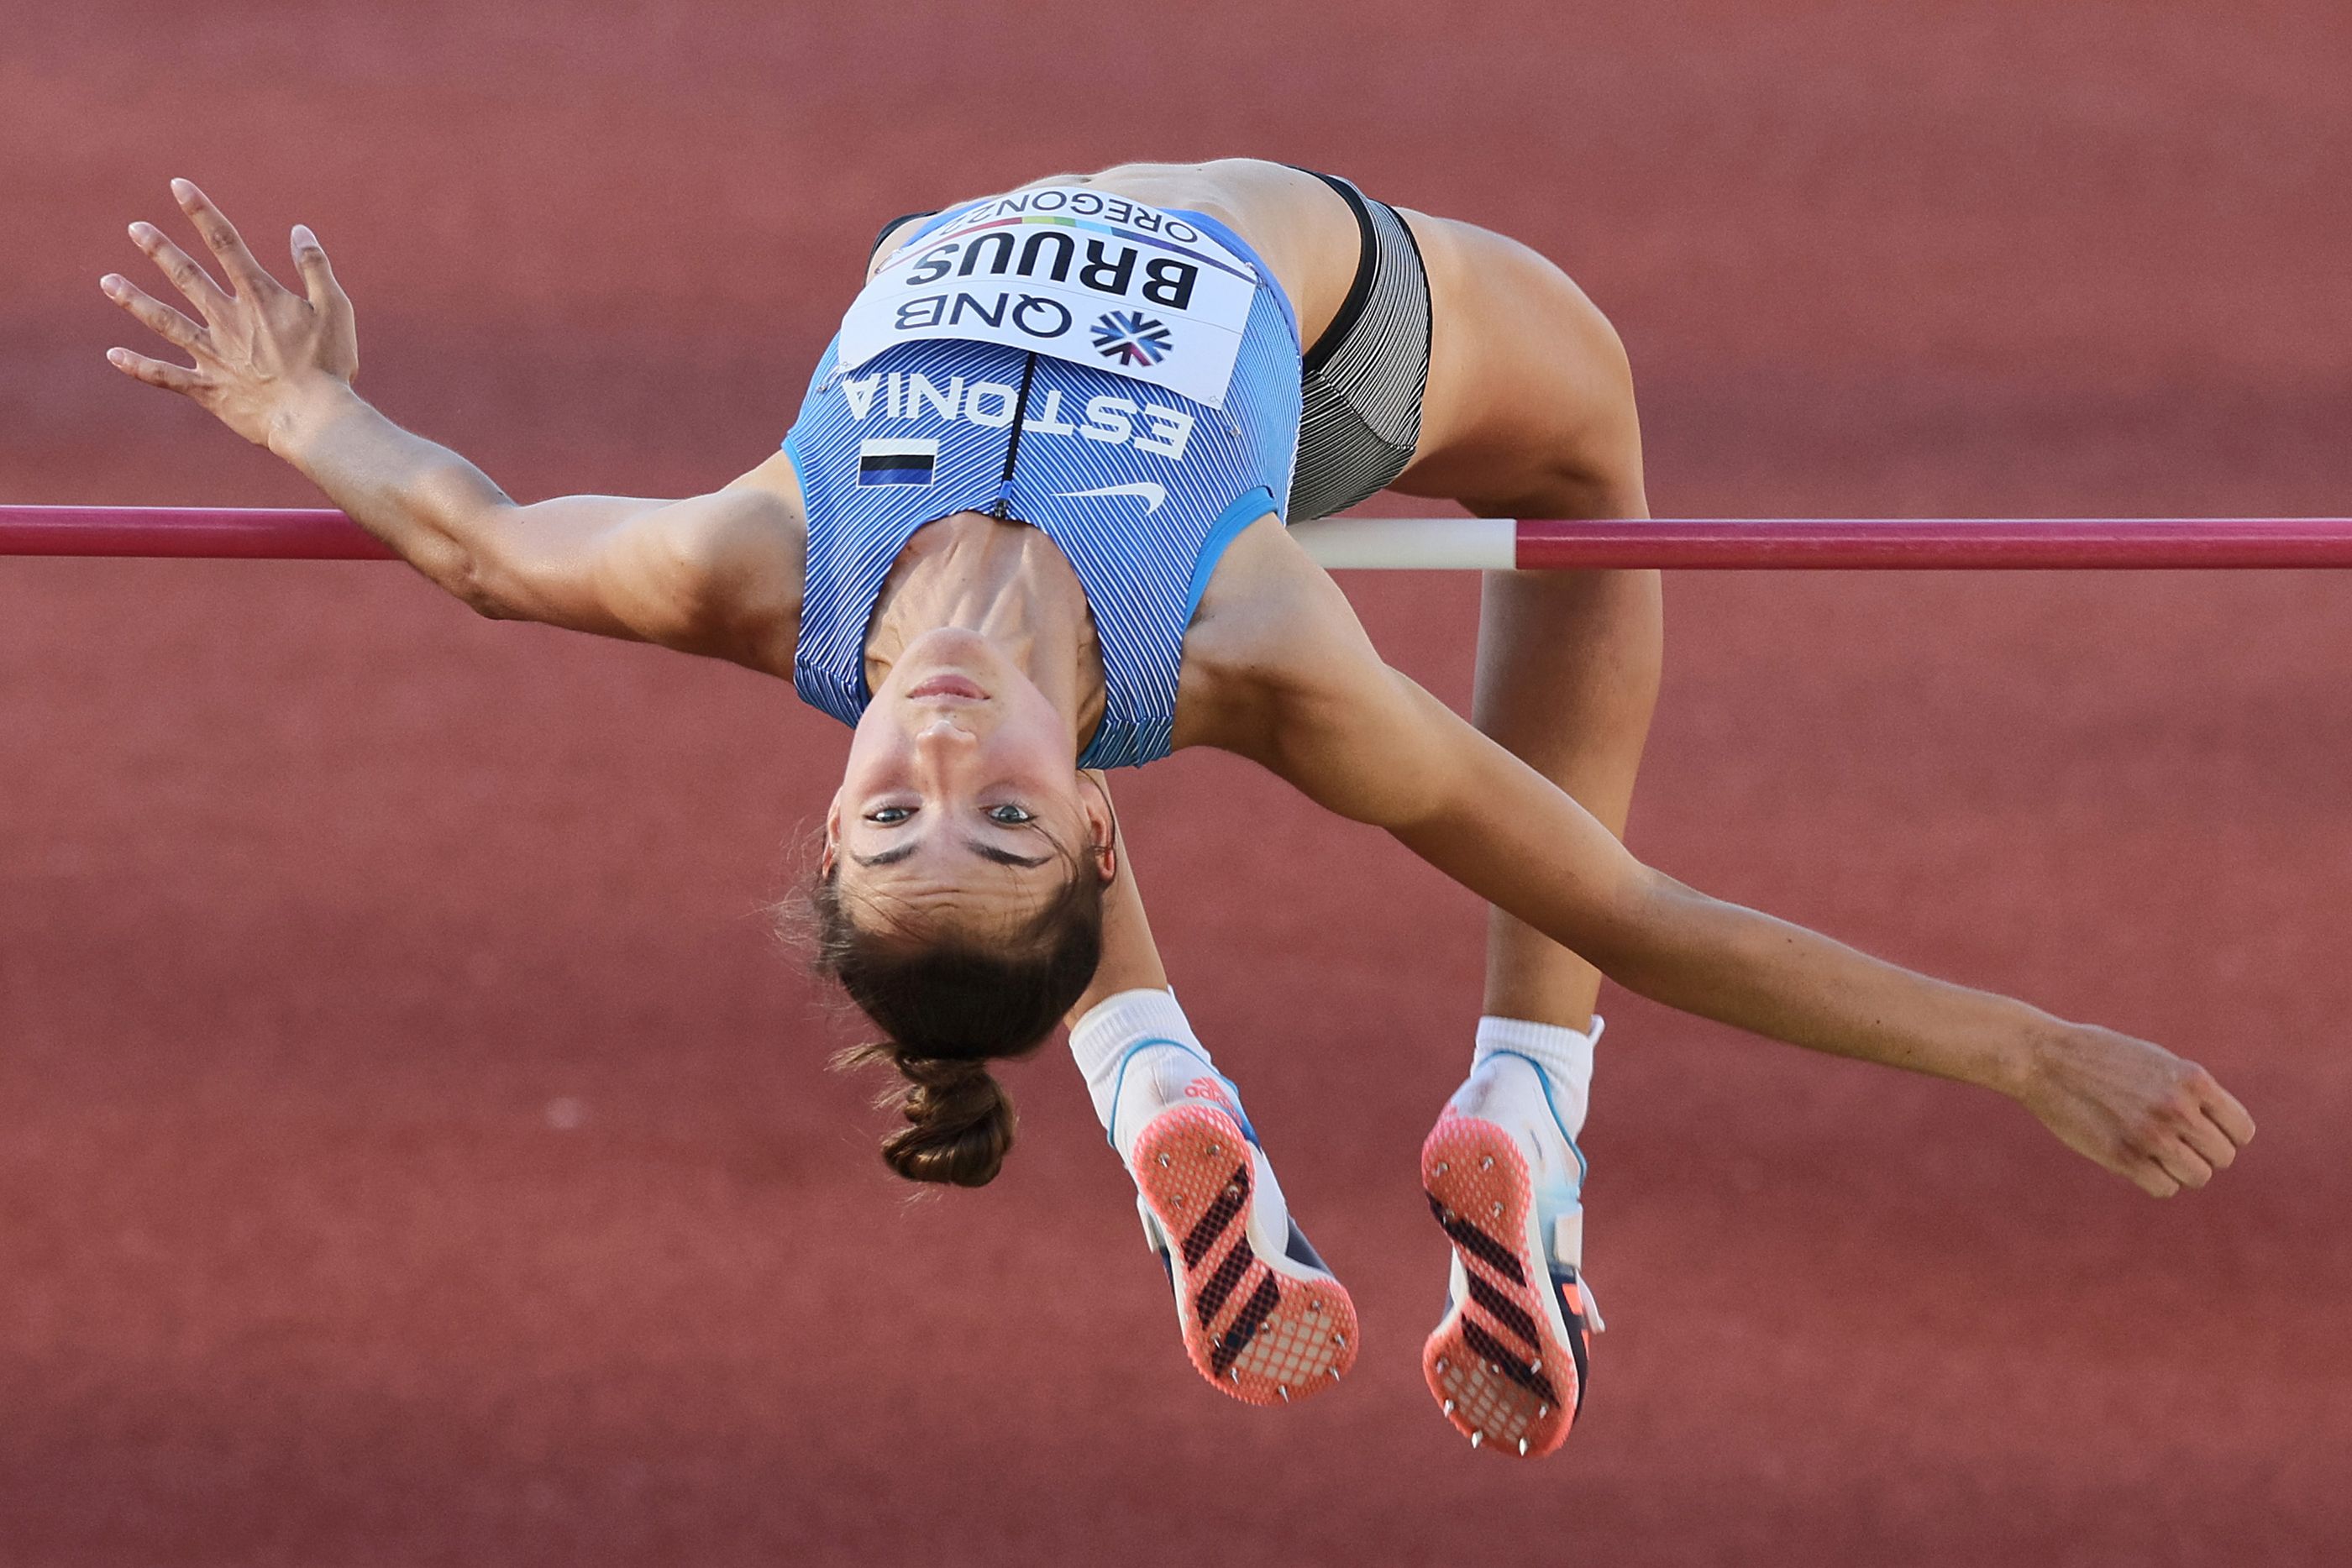 Karmen Bruus competes in the high jump final at the World Athletics Championships Oregon22